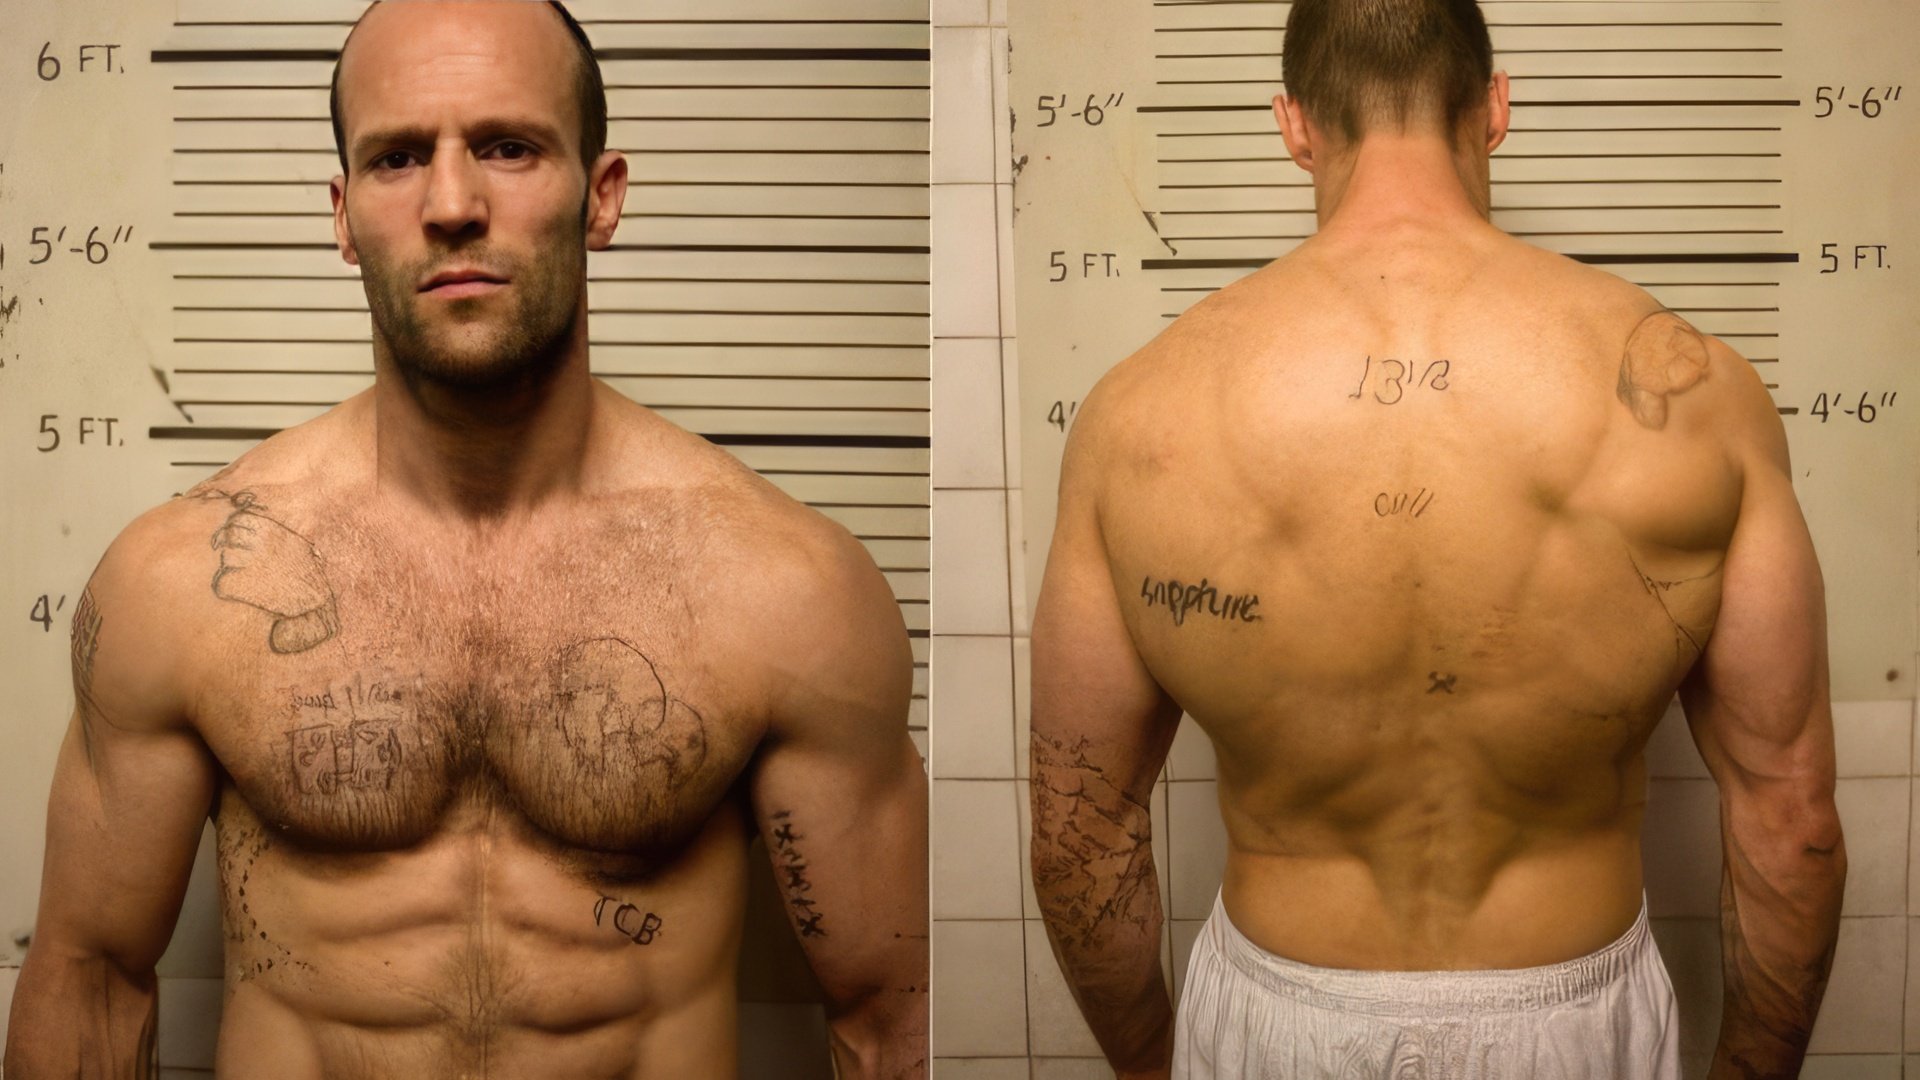 Jason Statham’s figure is perfect for his character roles